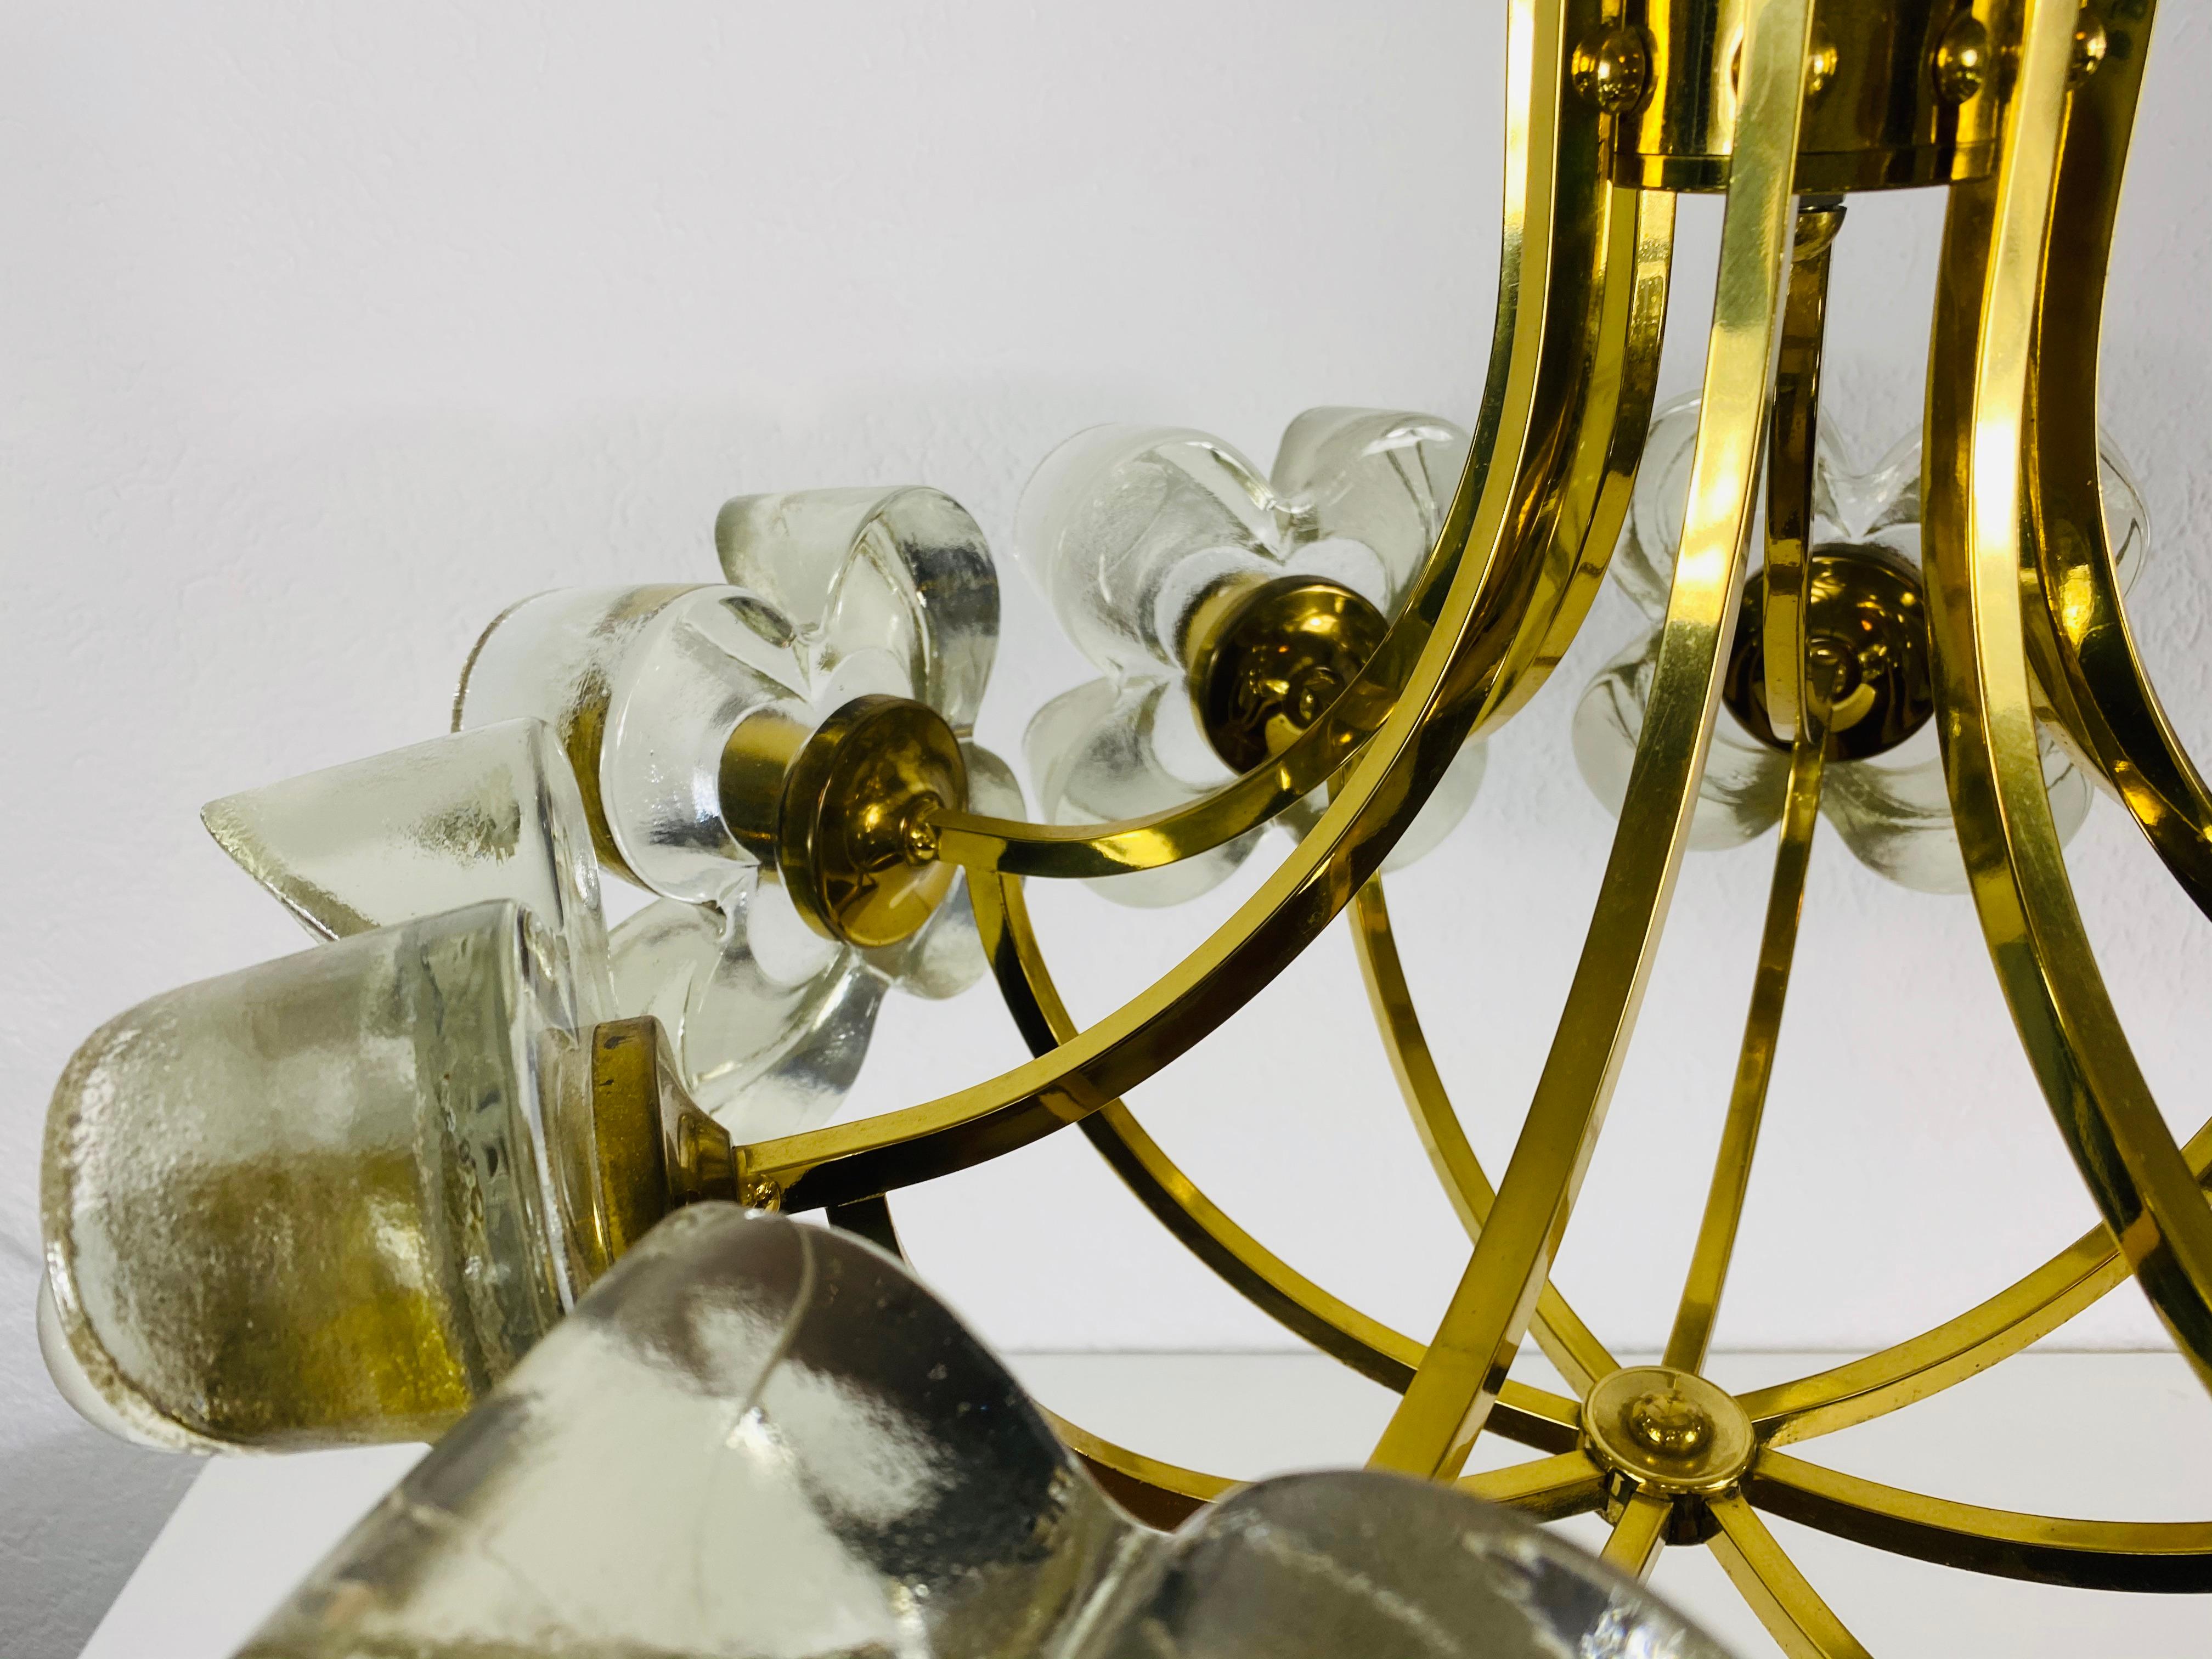 Italian Midcentury Glass and Brass 8-Arm Chandelier Mazzega Attributed, 1960s For Sale 3